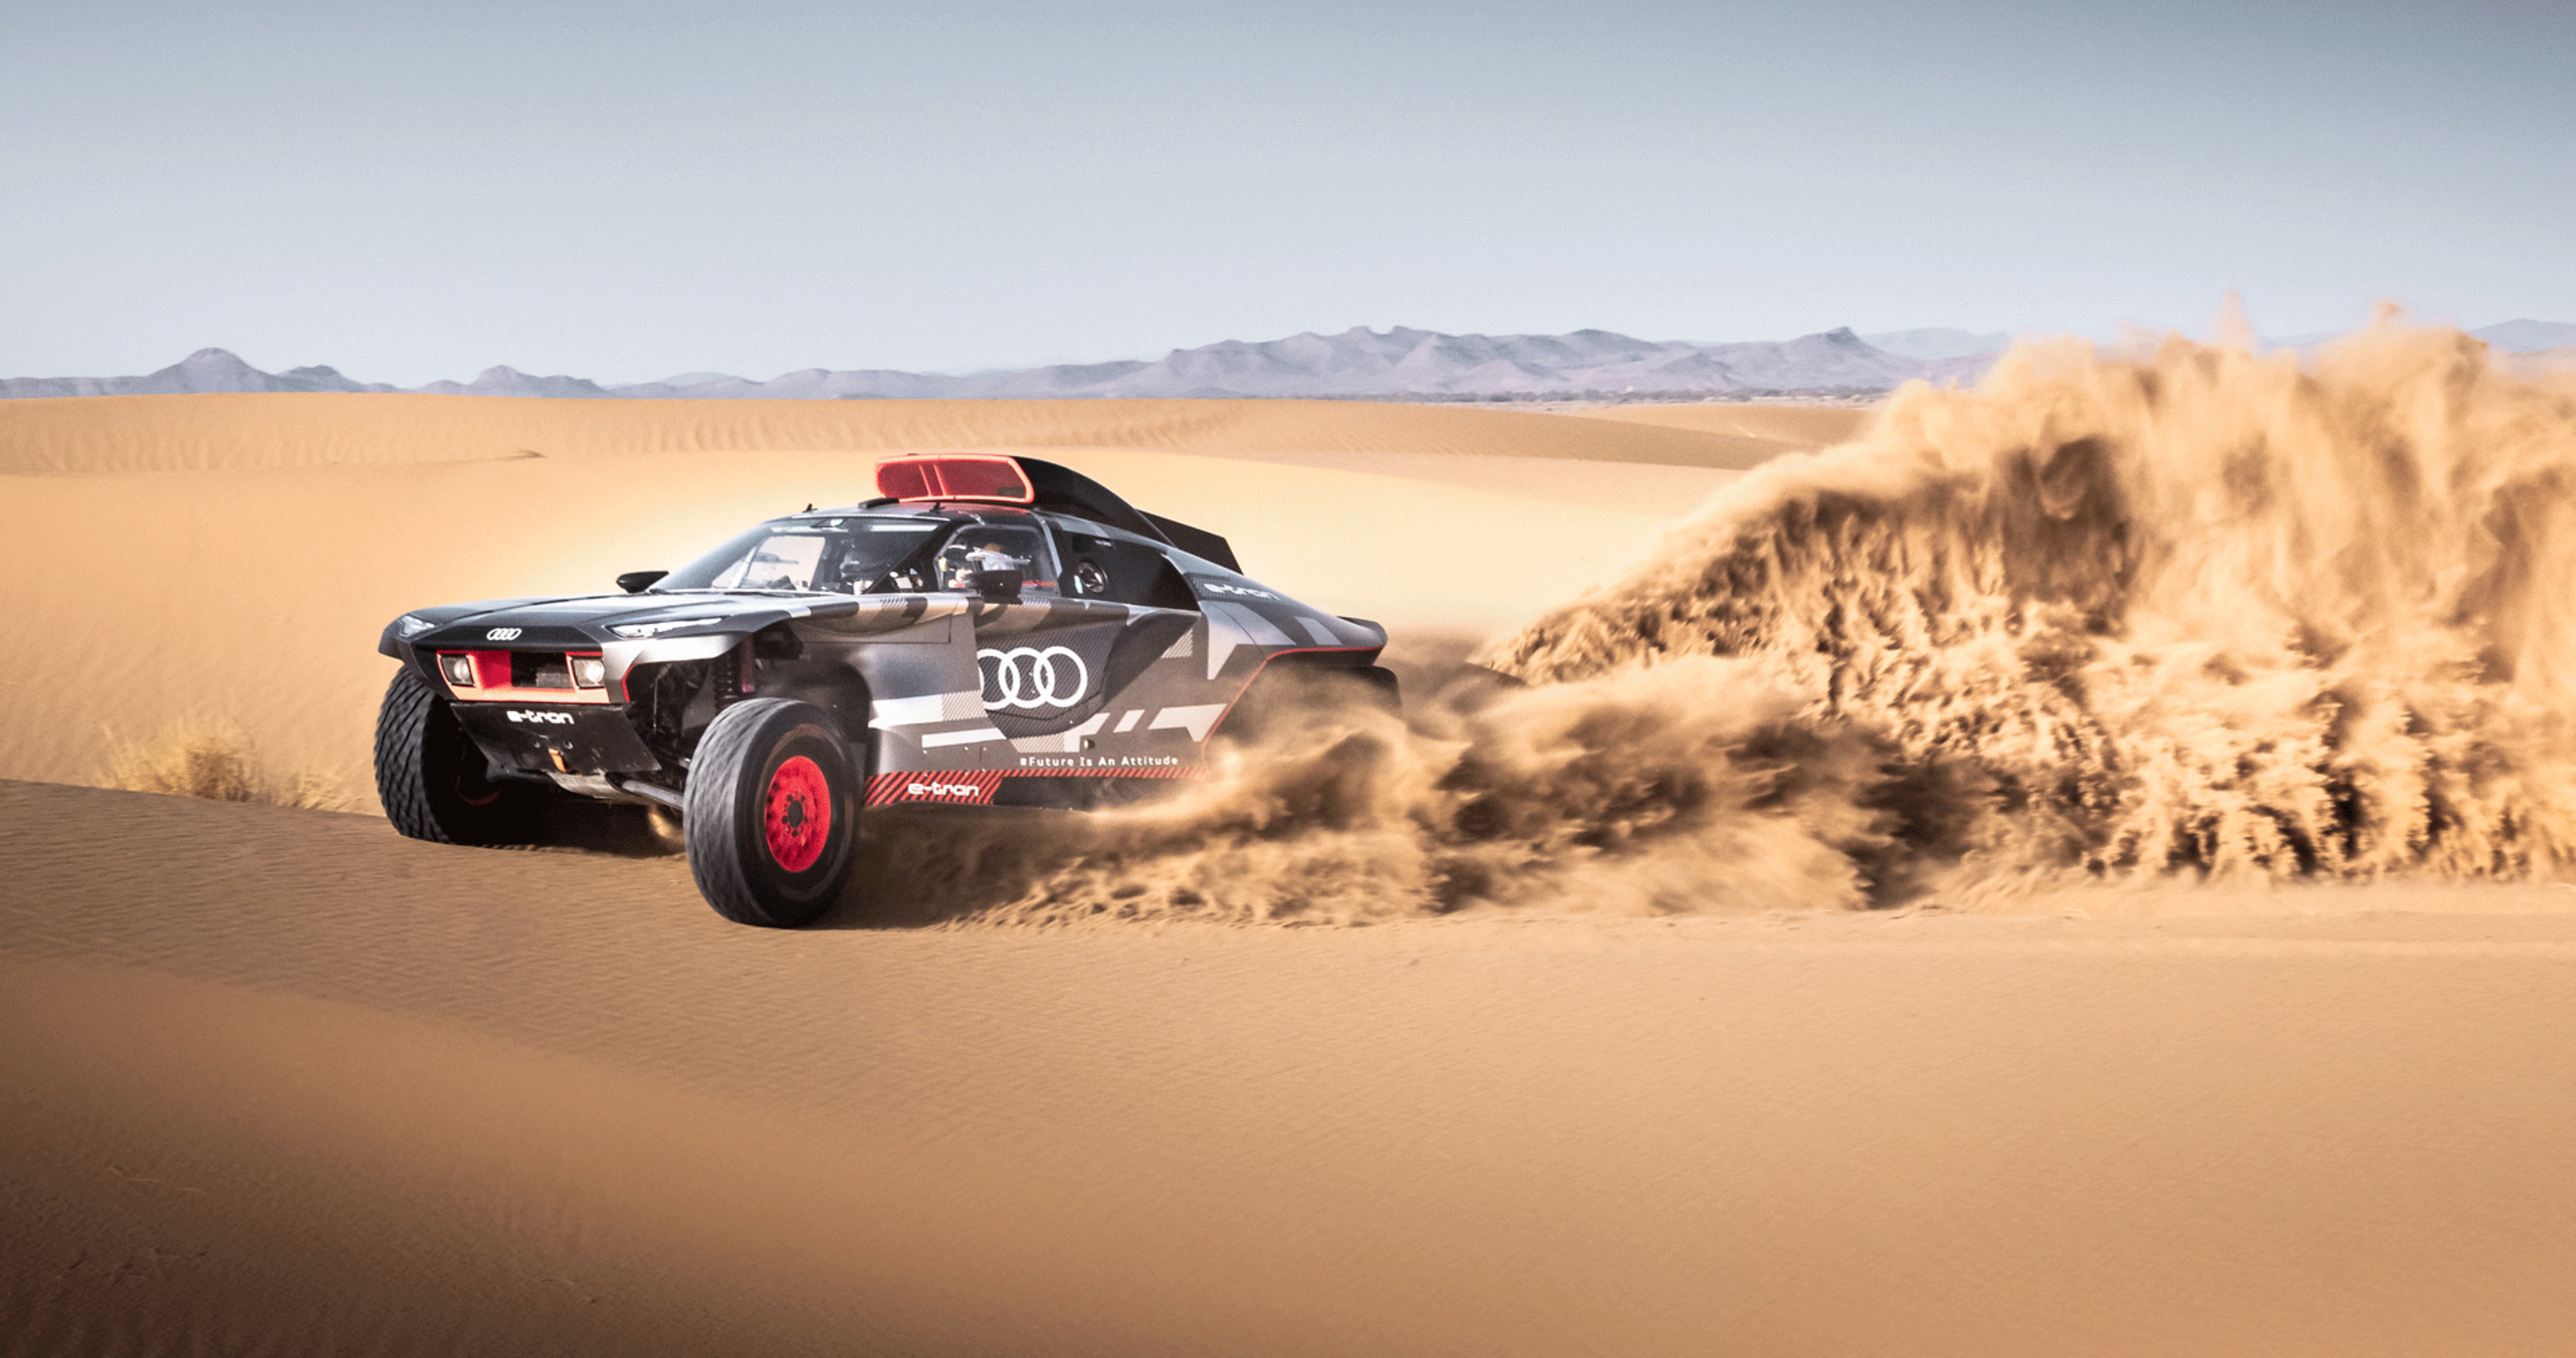 The Road to Dakar | Putting the Audi RS Q e-tron¹ through its paces